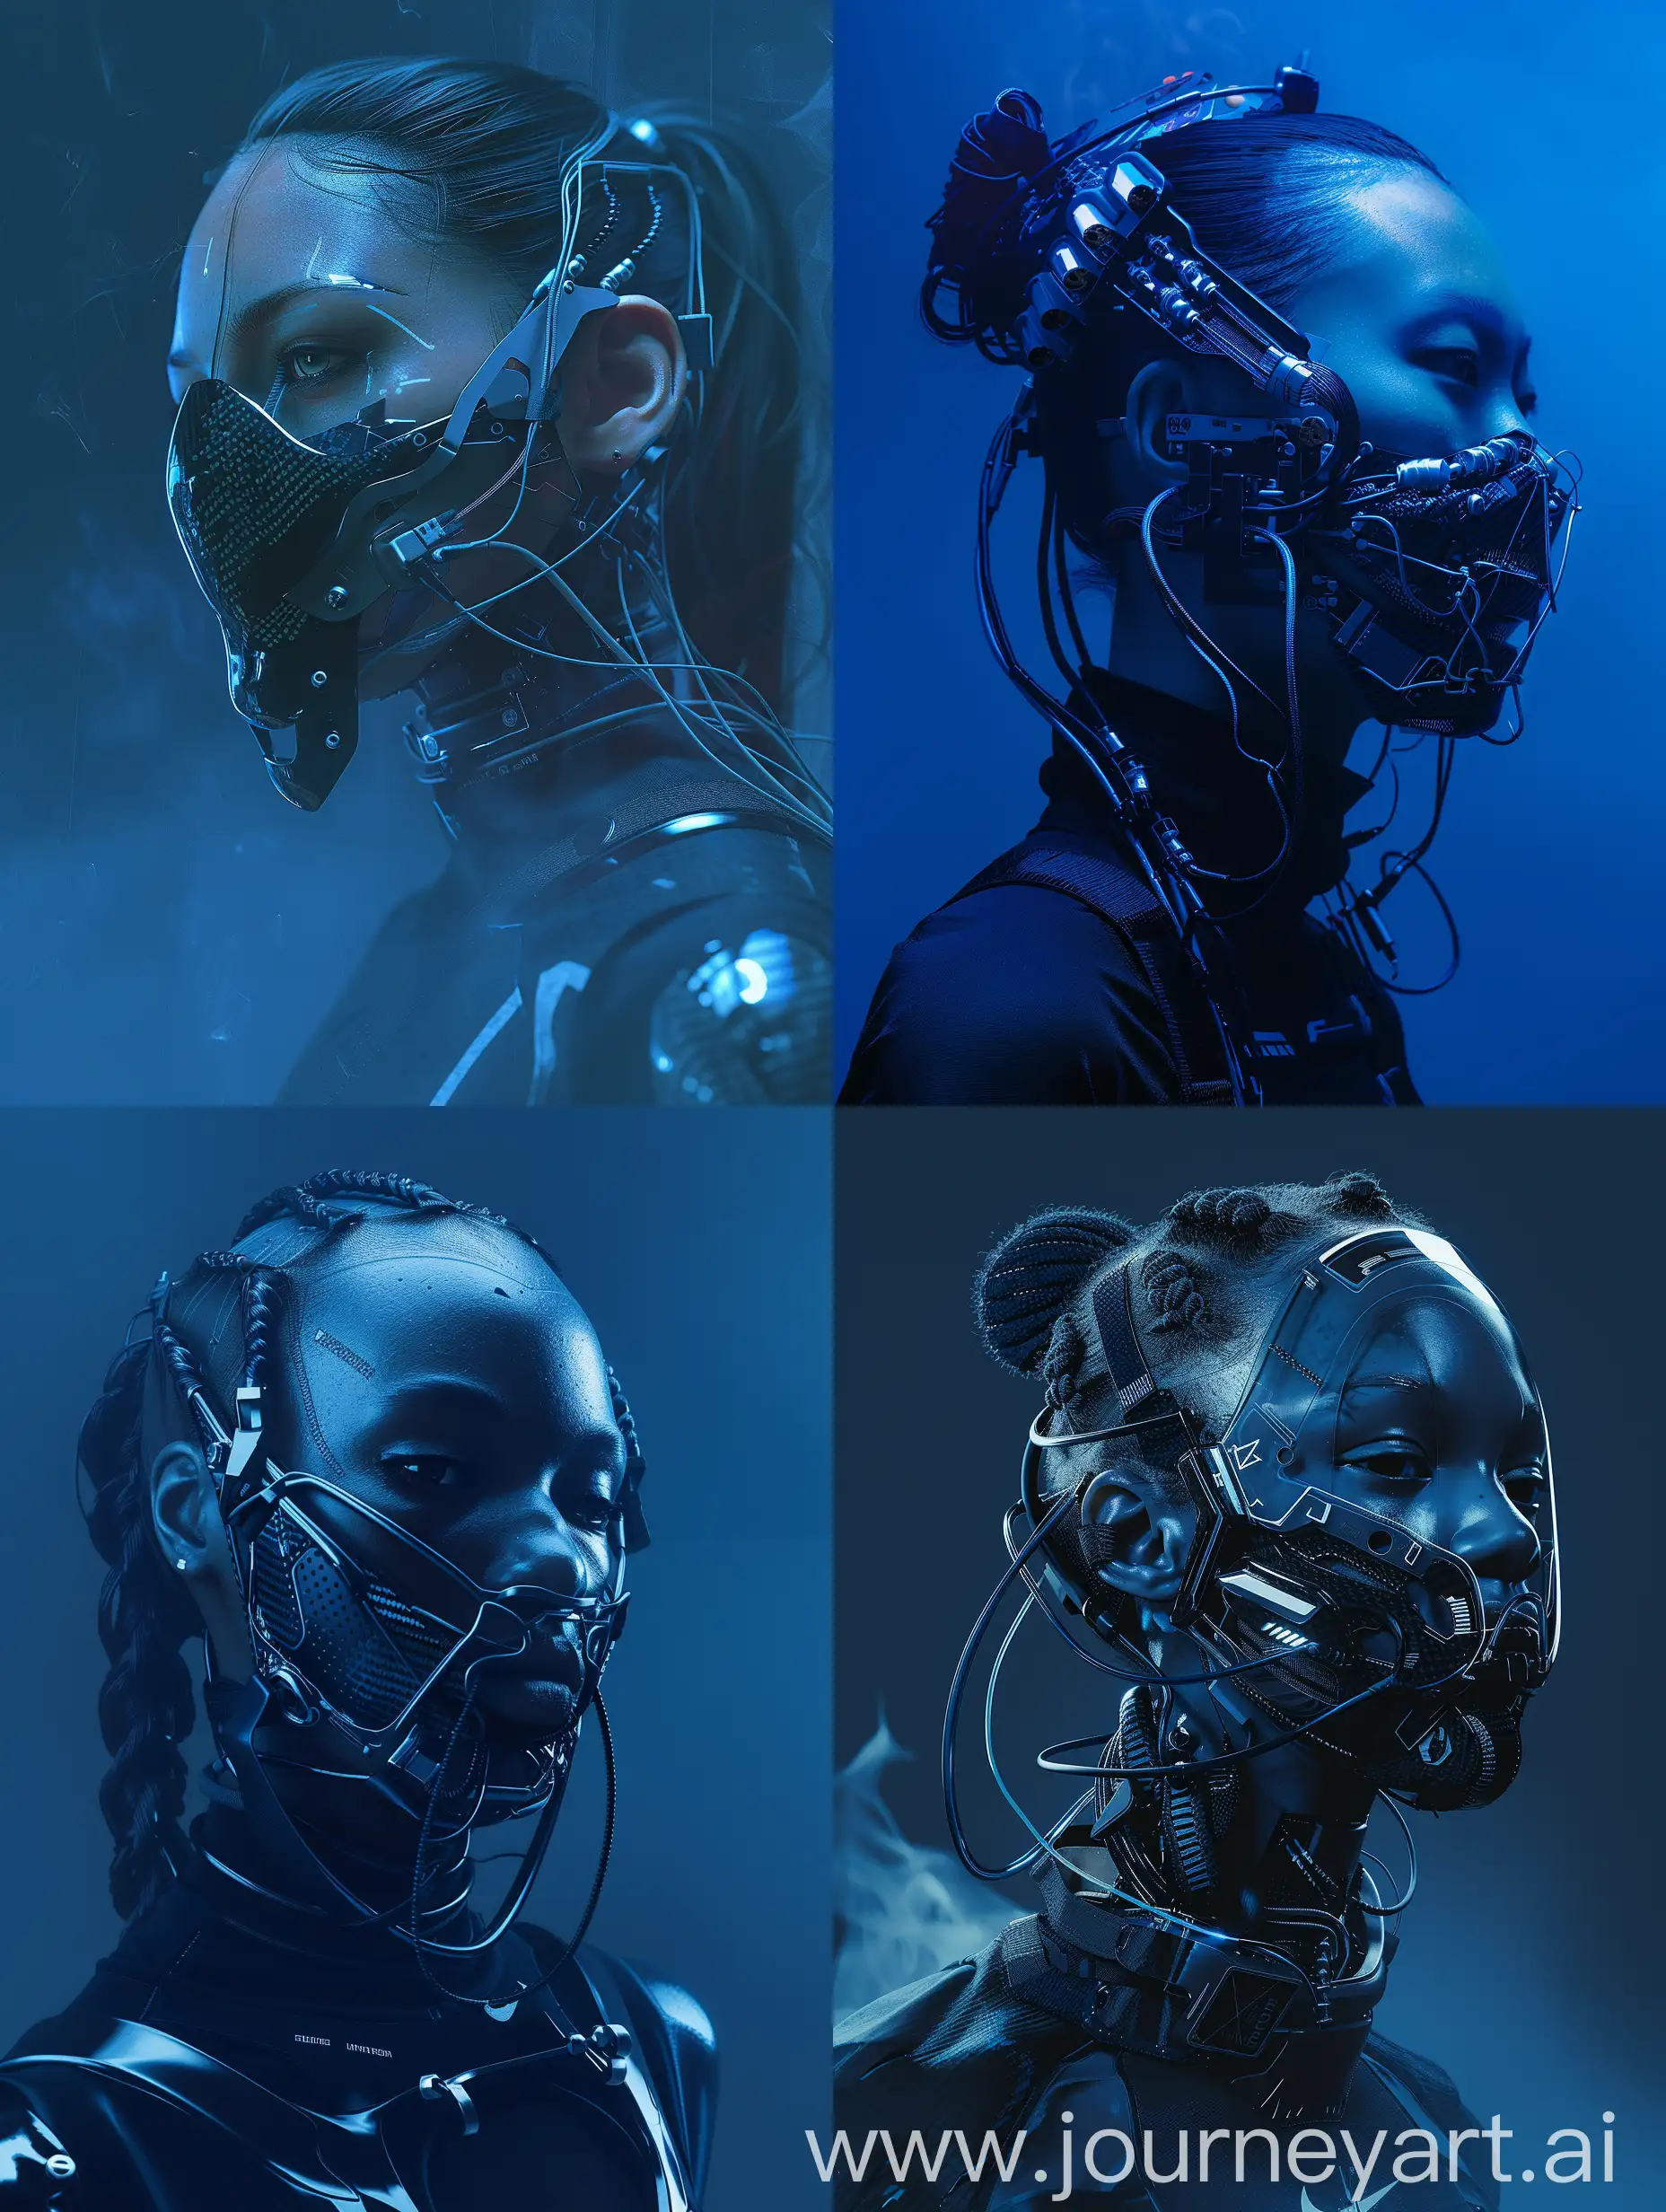 Futuristic-Cyberpunk-Character-with-Intricate-Cybernetic-Mask-and-NikeInspired-Addons